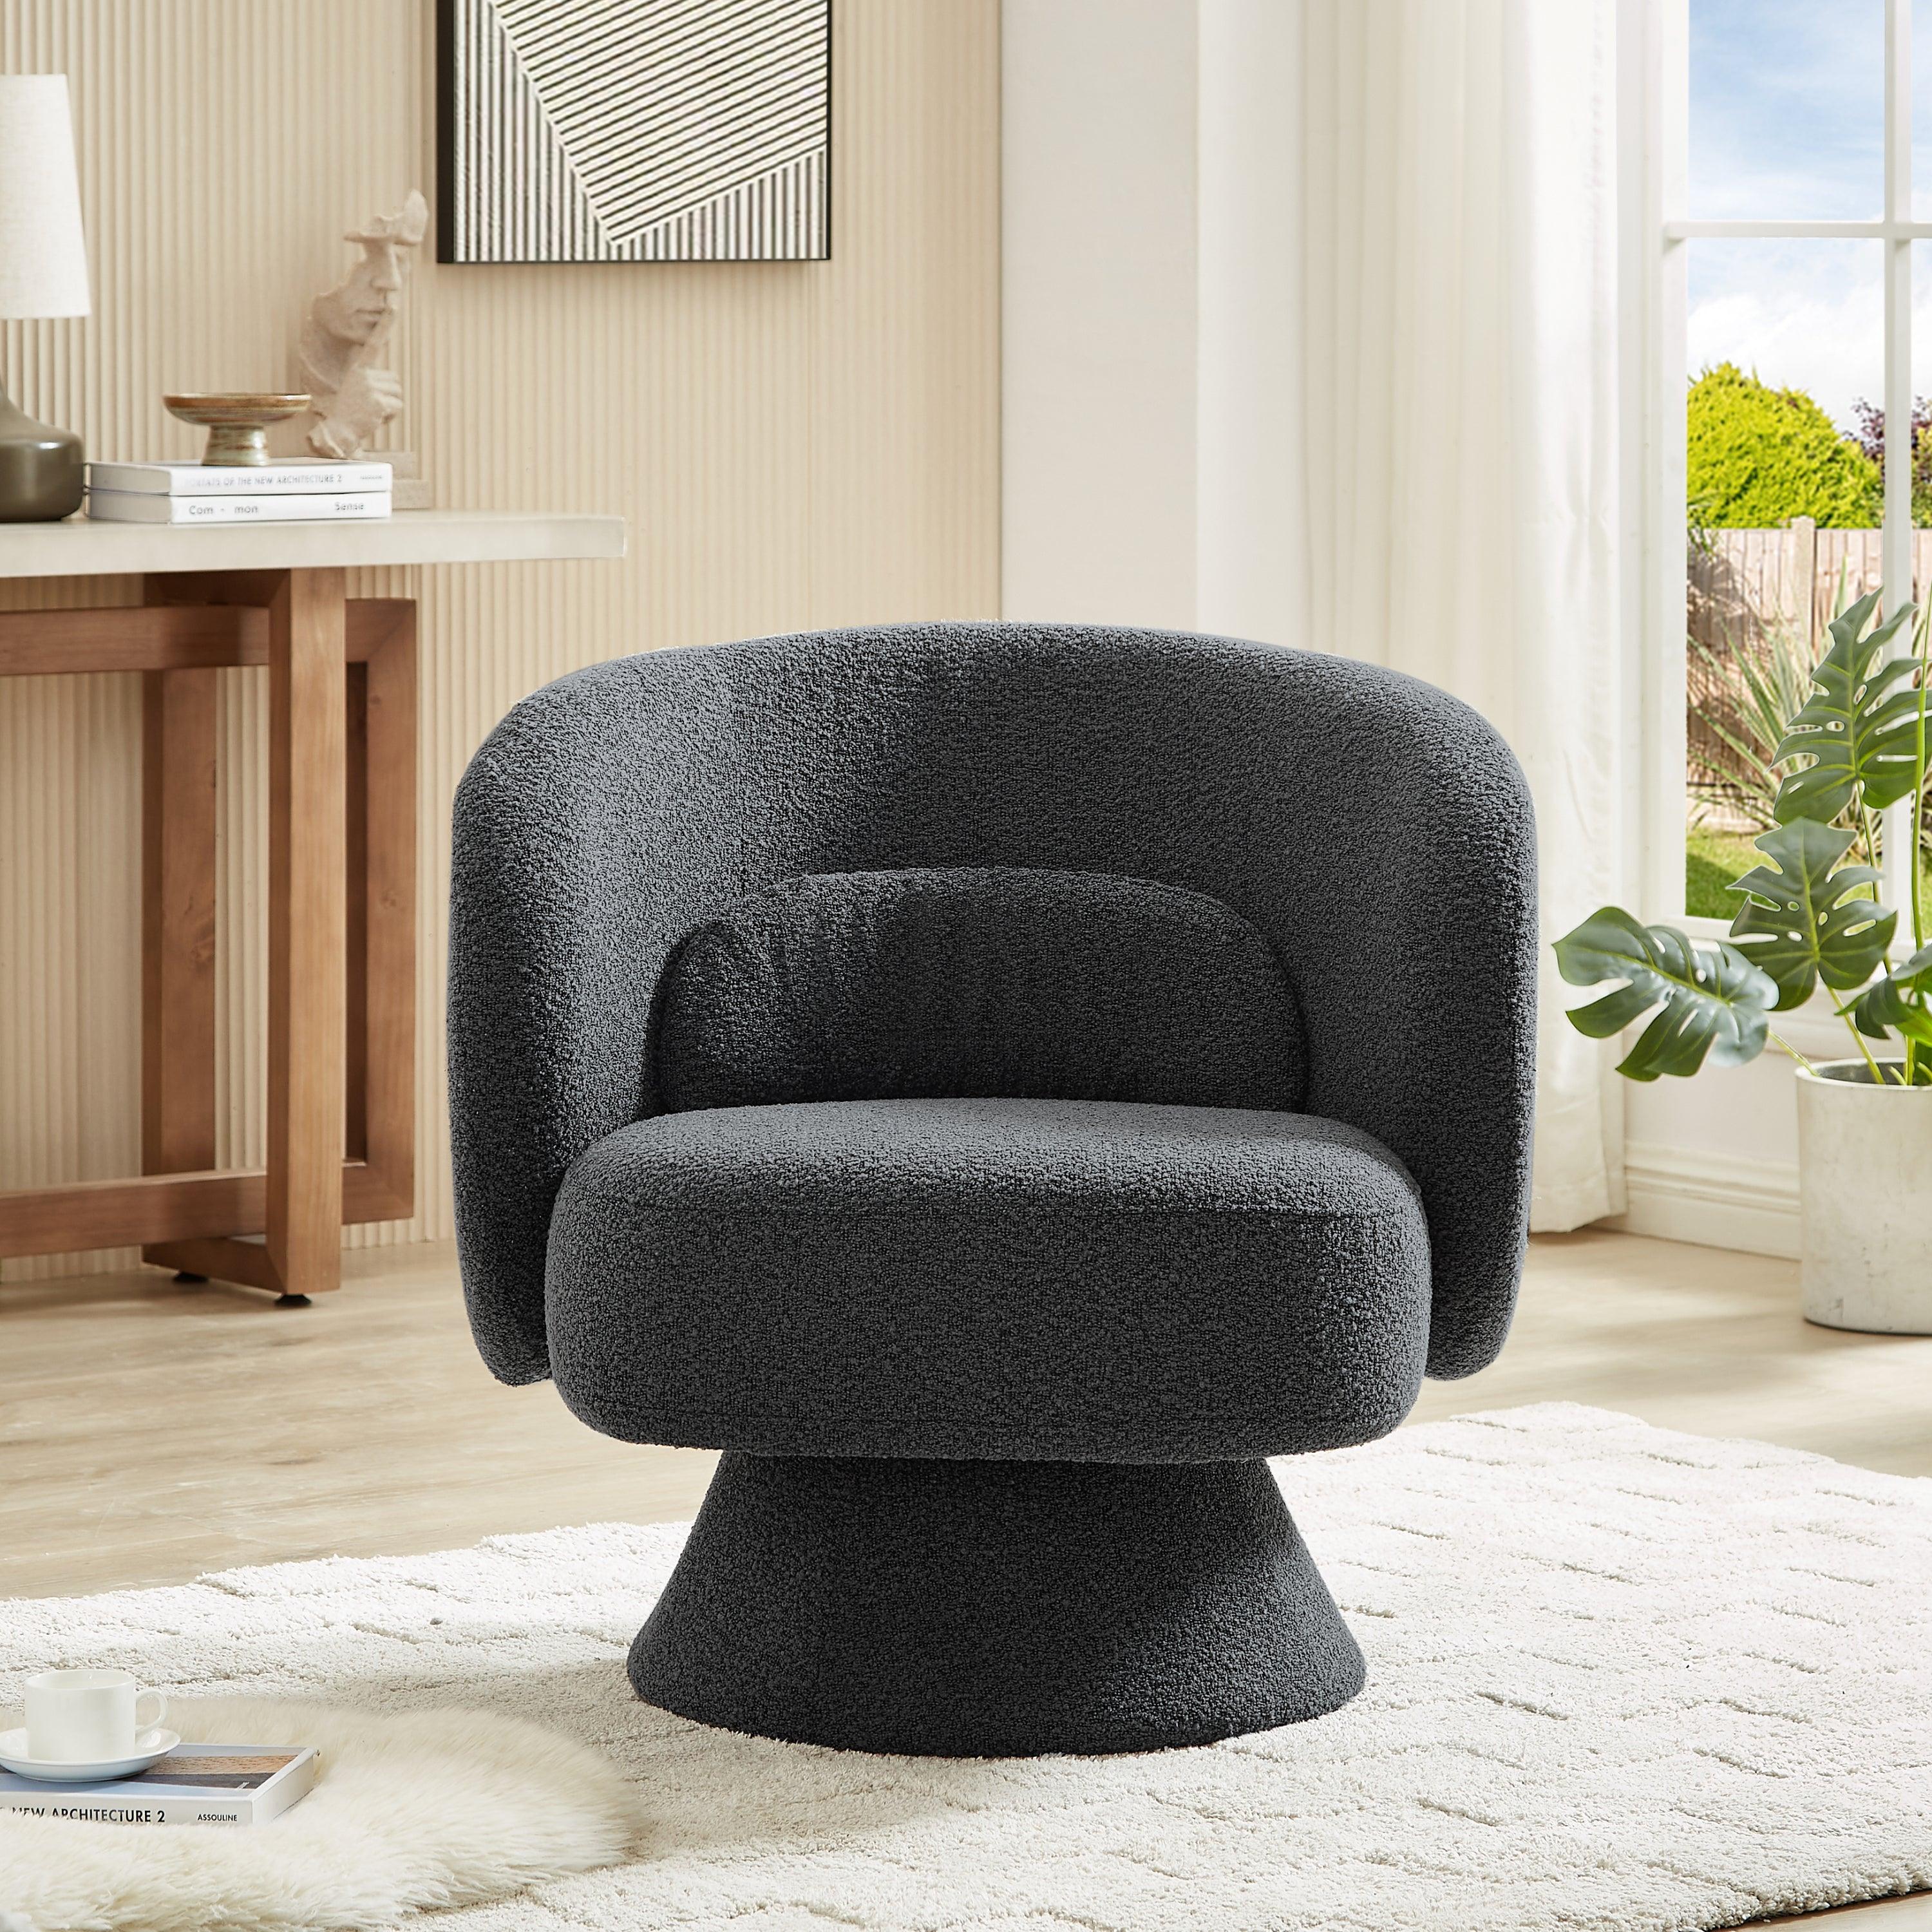 🆓🚛 360 Degree Swivel Sherpa Accent Chair Modern Style Barrel Chair With Toss Pillows for Home Office, Living Room, Bedroom, Dark Gray